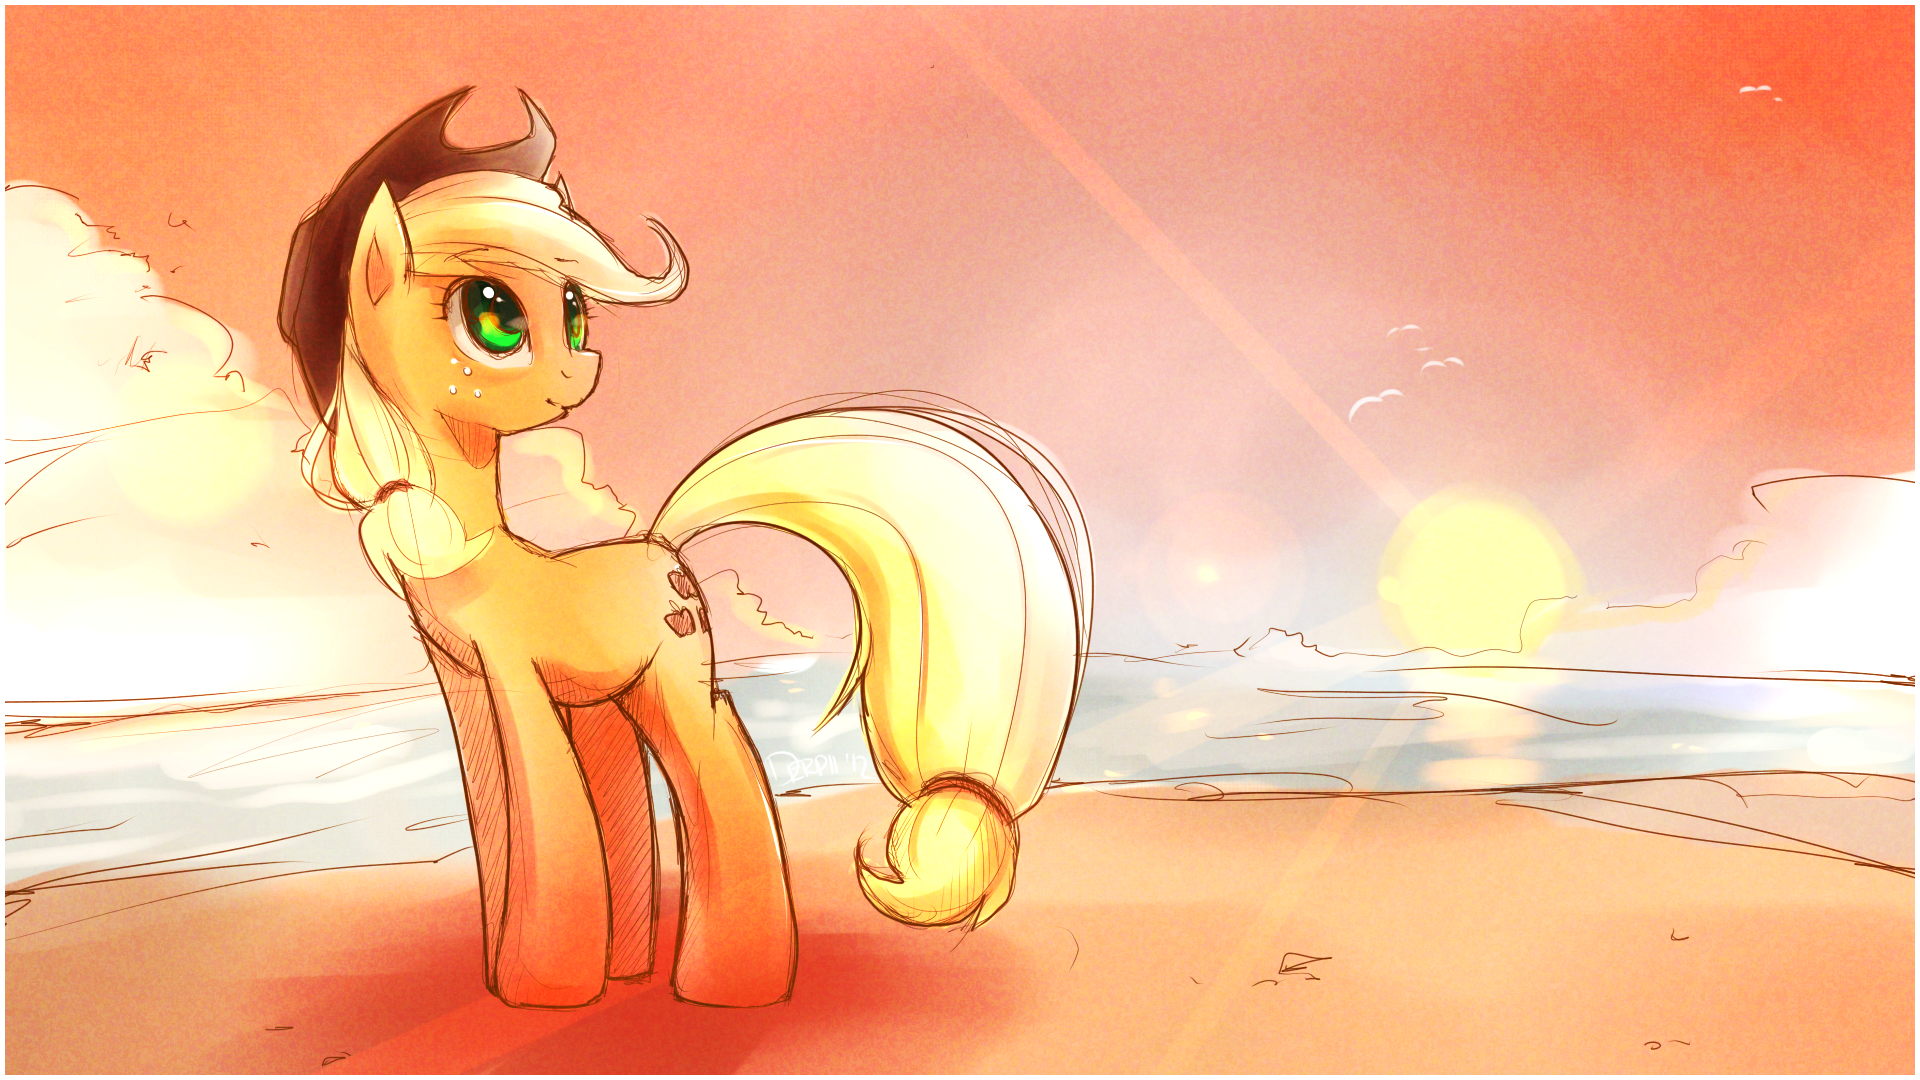 By the way, an Applejack wallpaper by derpiihooves